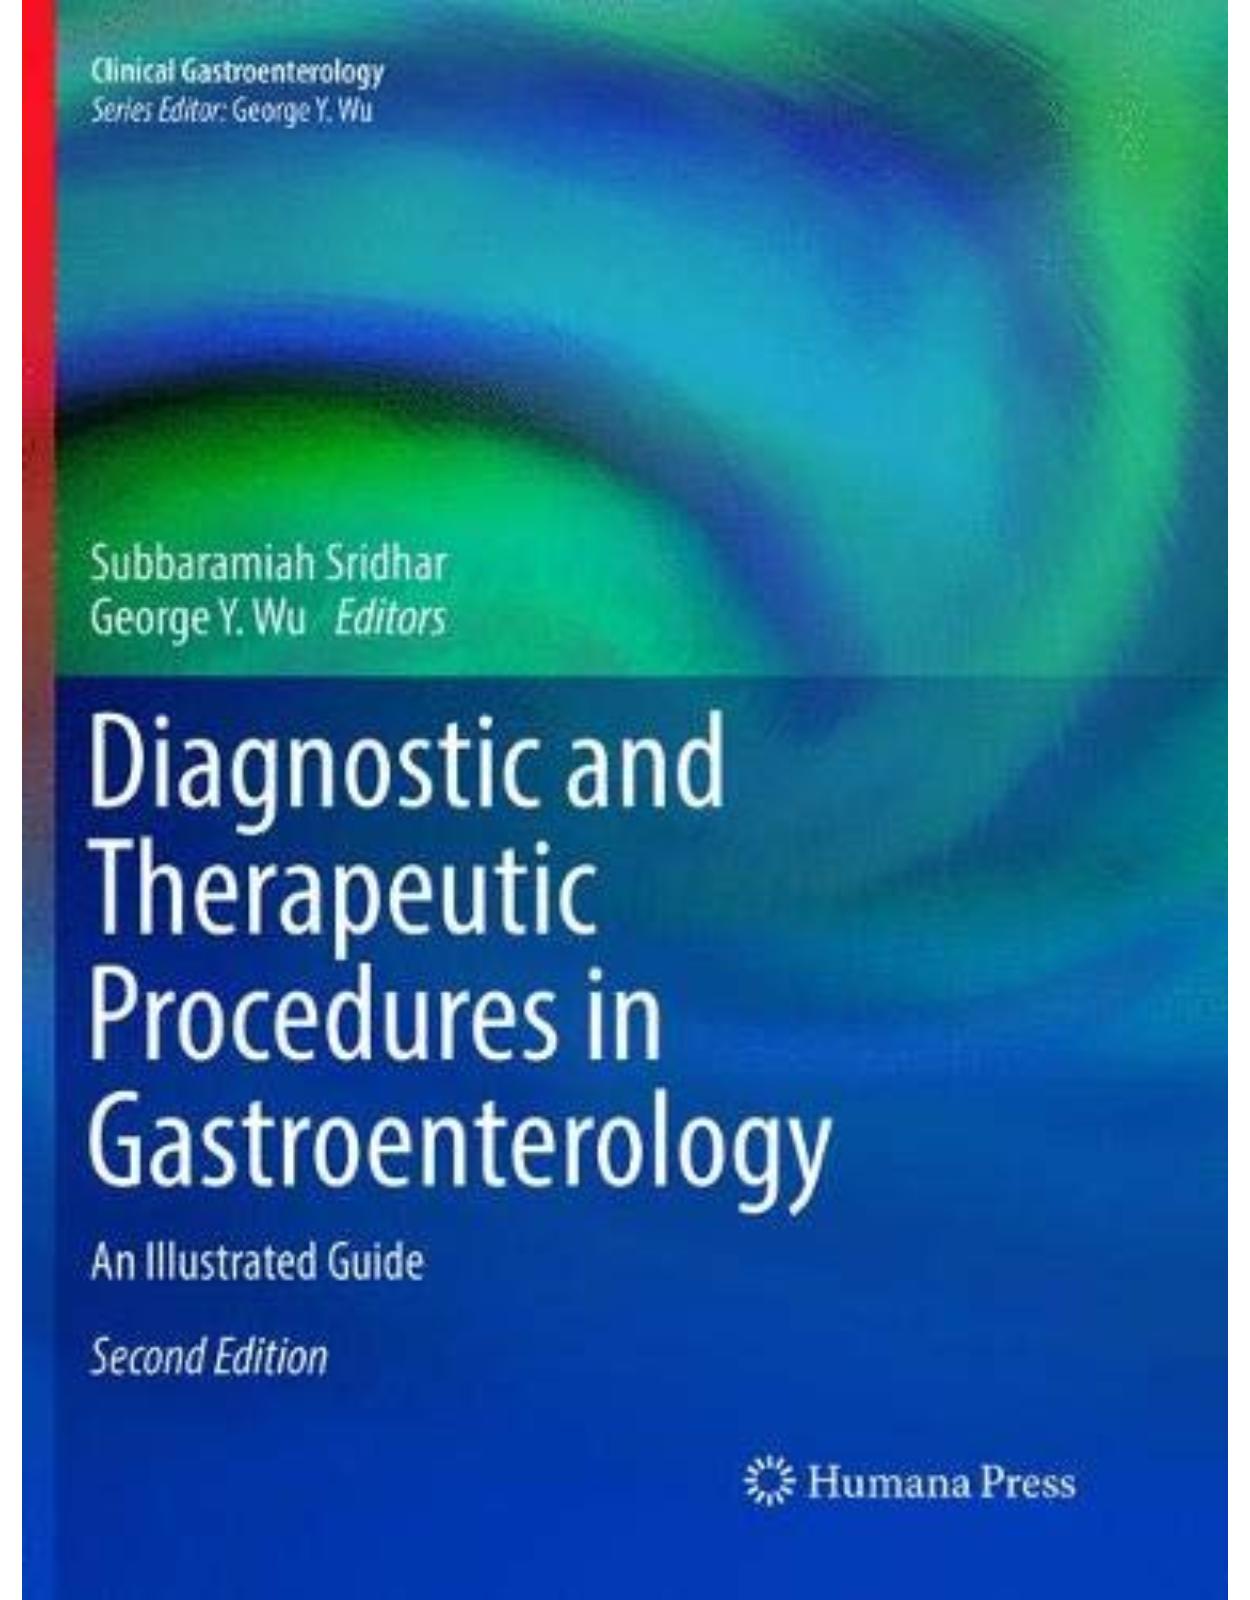 Diagnostic and Therapeutic Procedures in Gastroenterology: An Illustrated Guide (Clinical Gastroenterology)